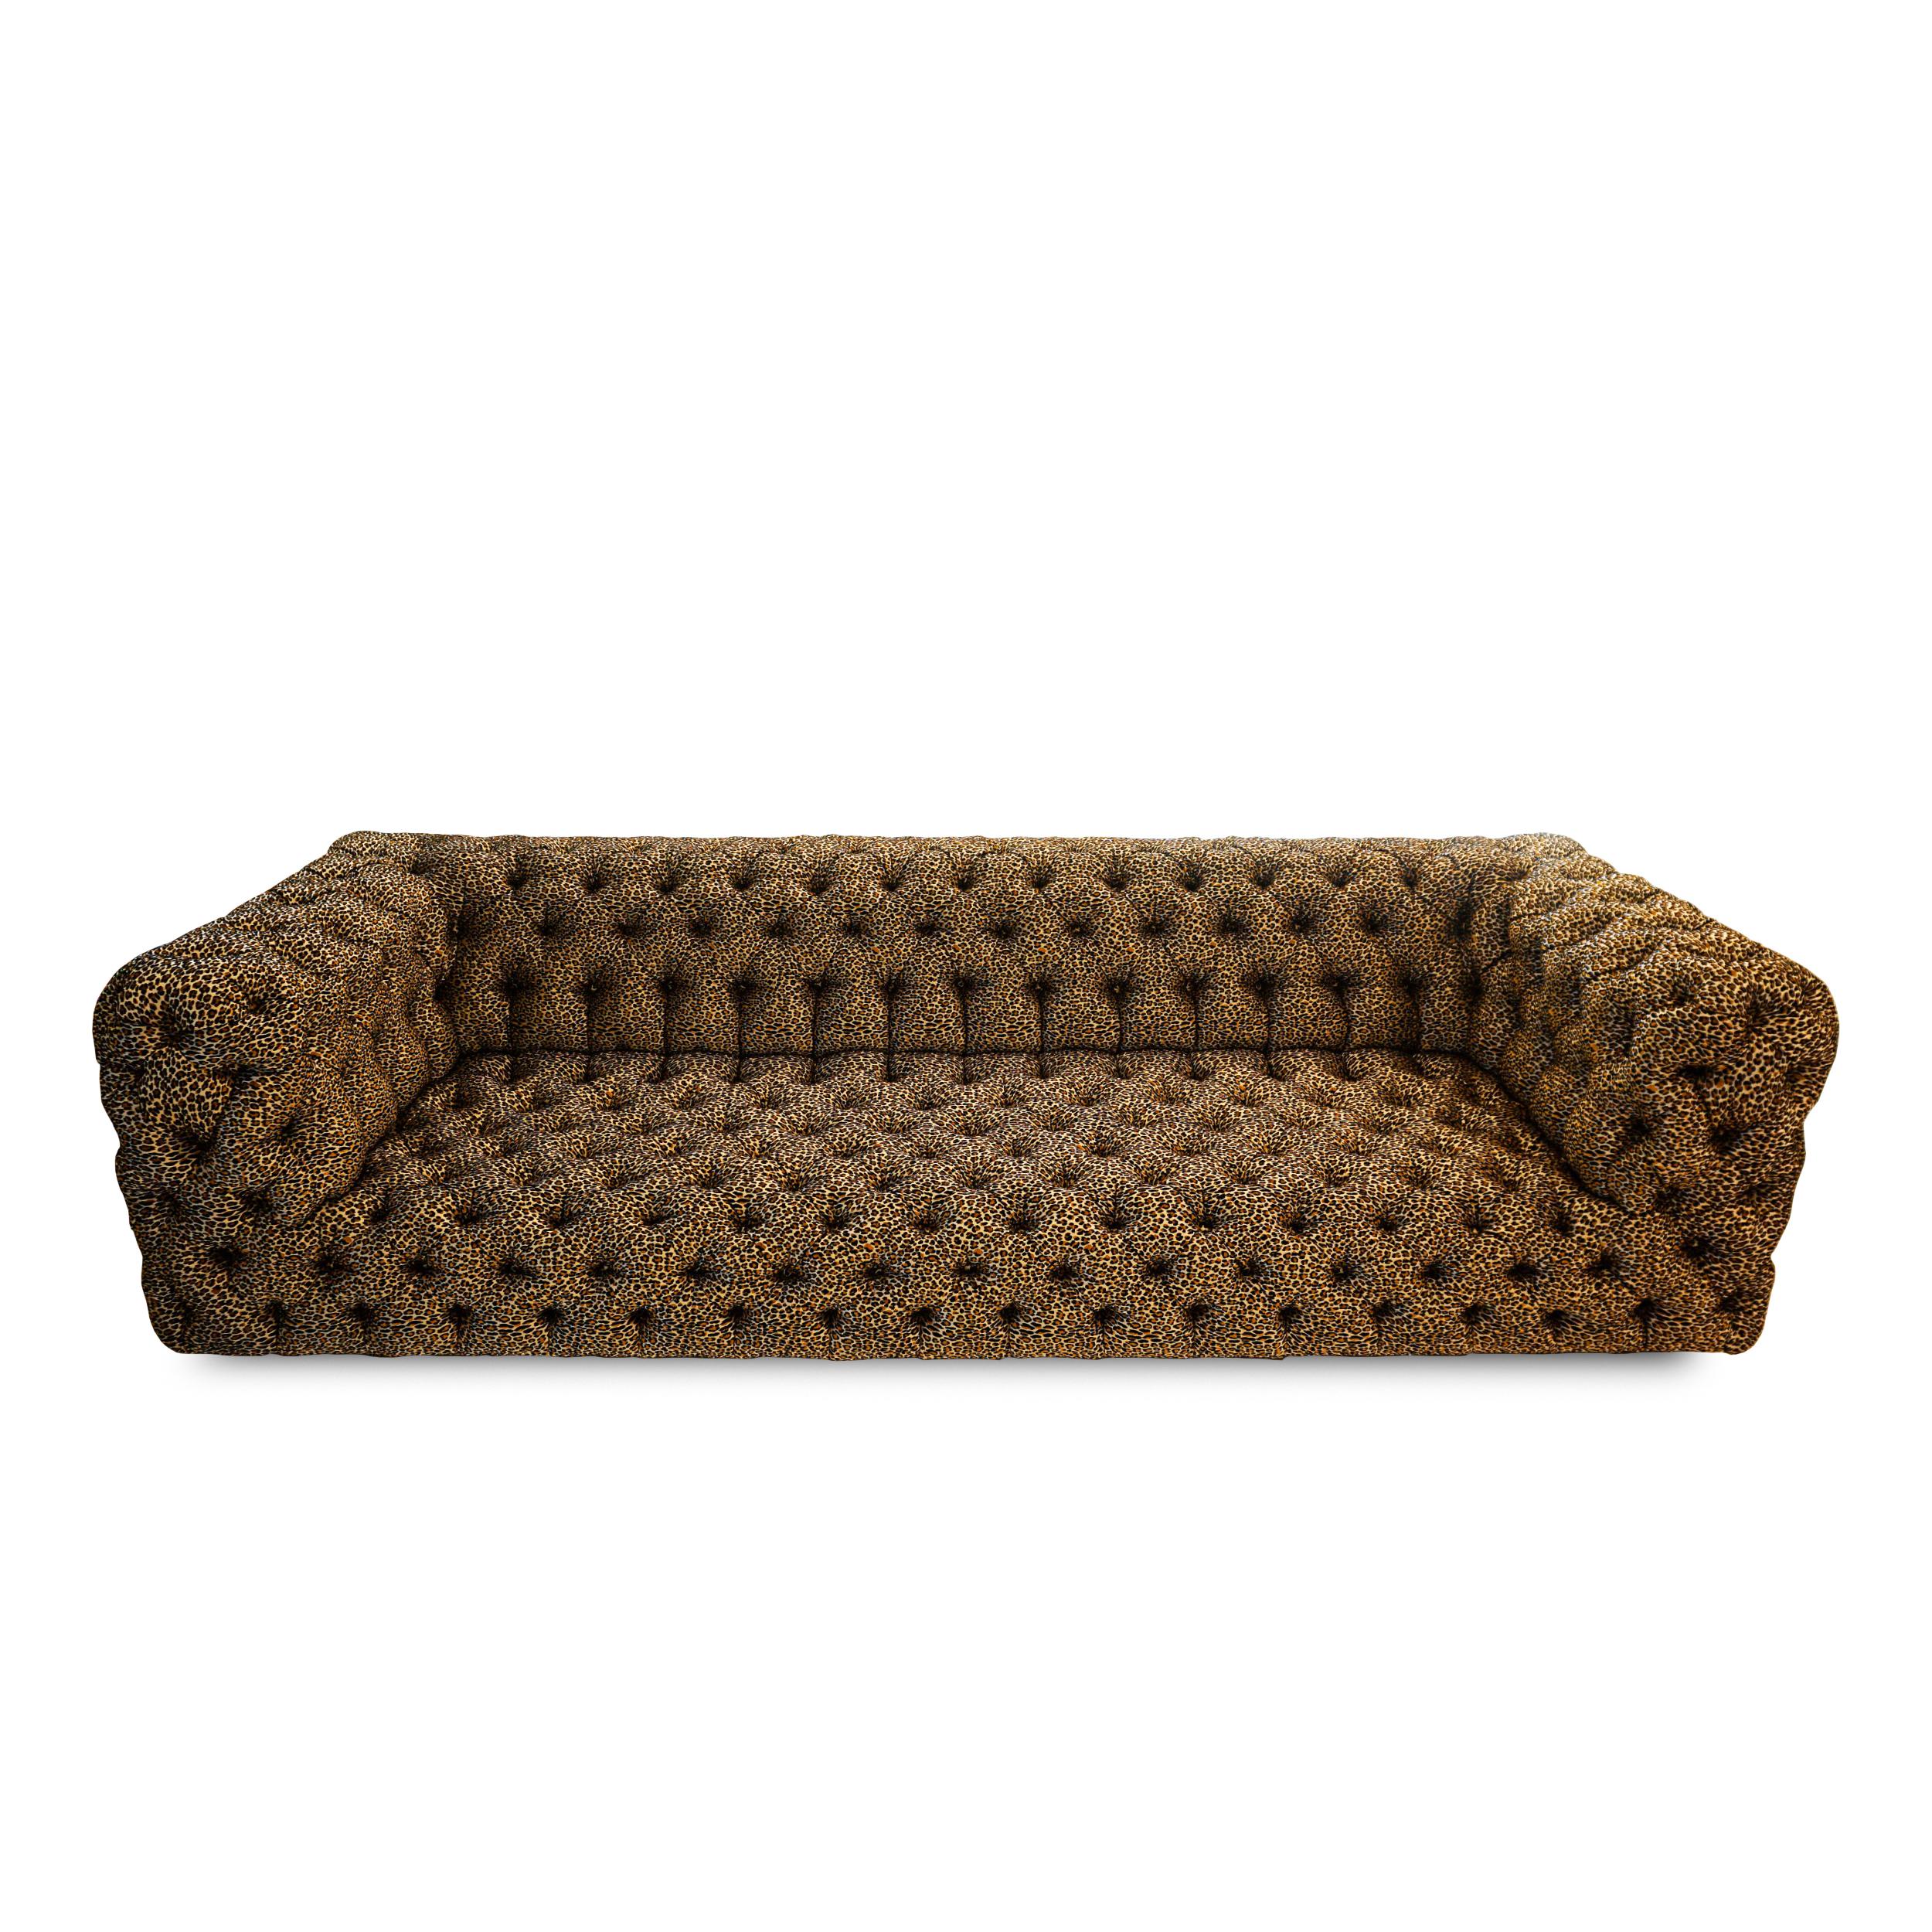 Tufted Leopard Print Sofa In New Condition For Sale In Greenwich, CT